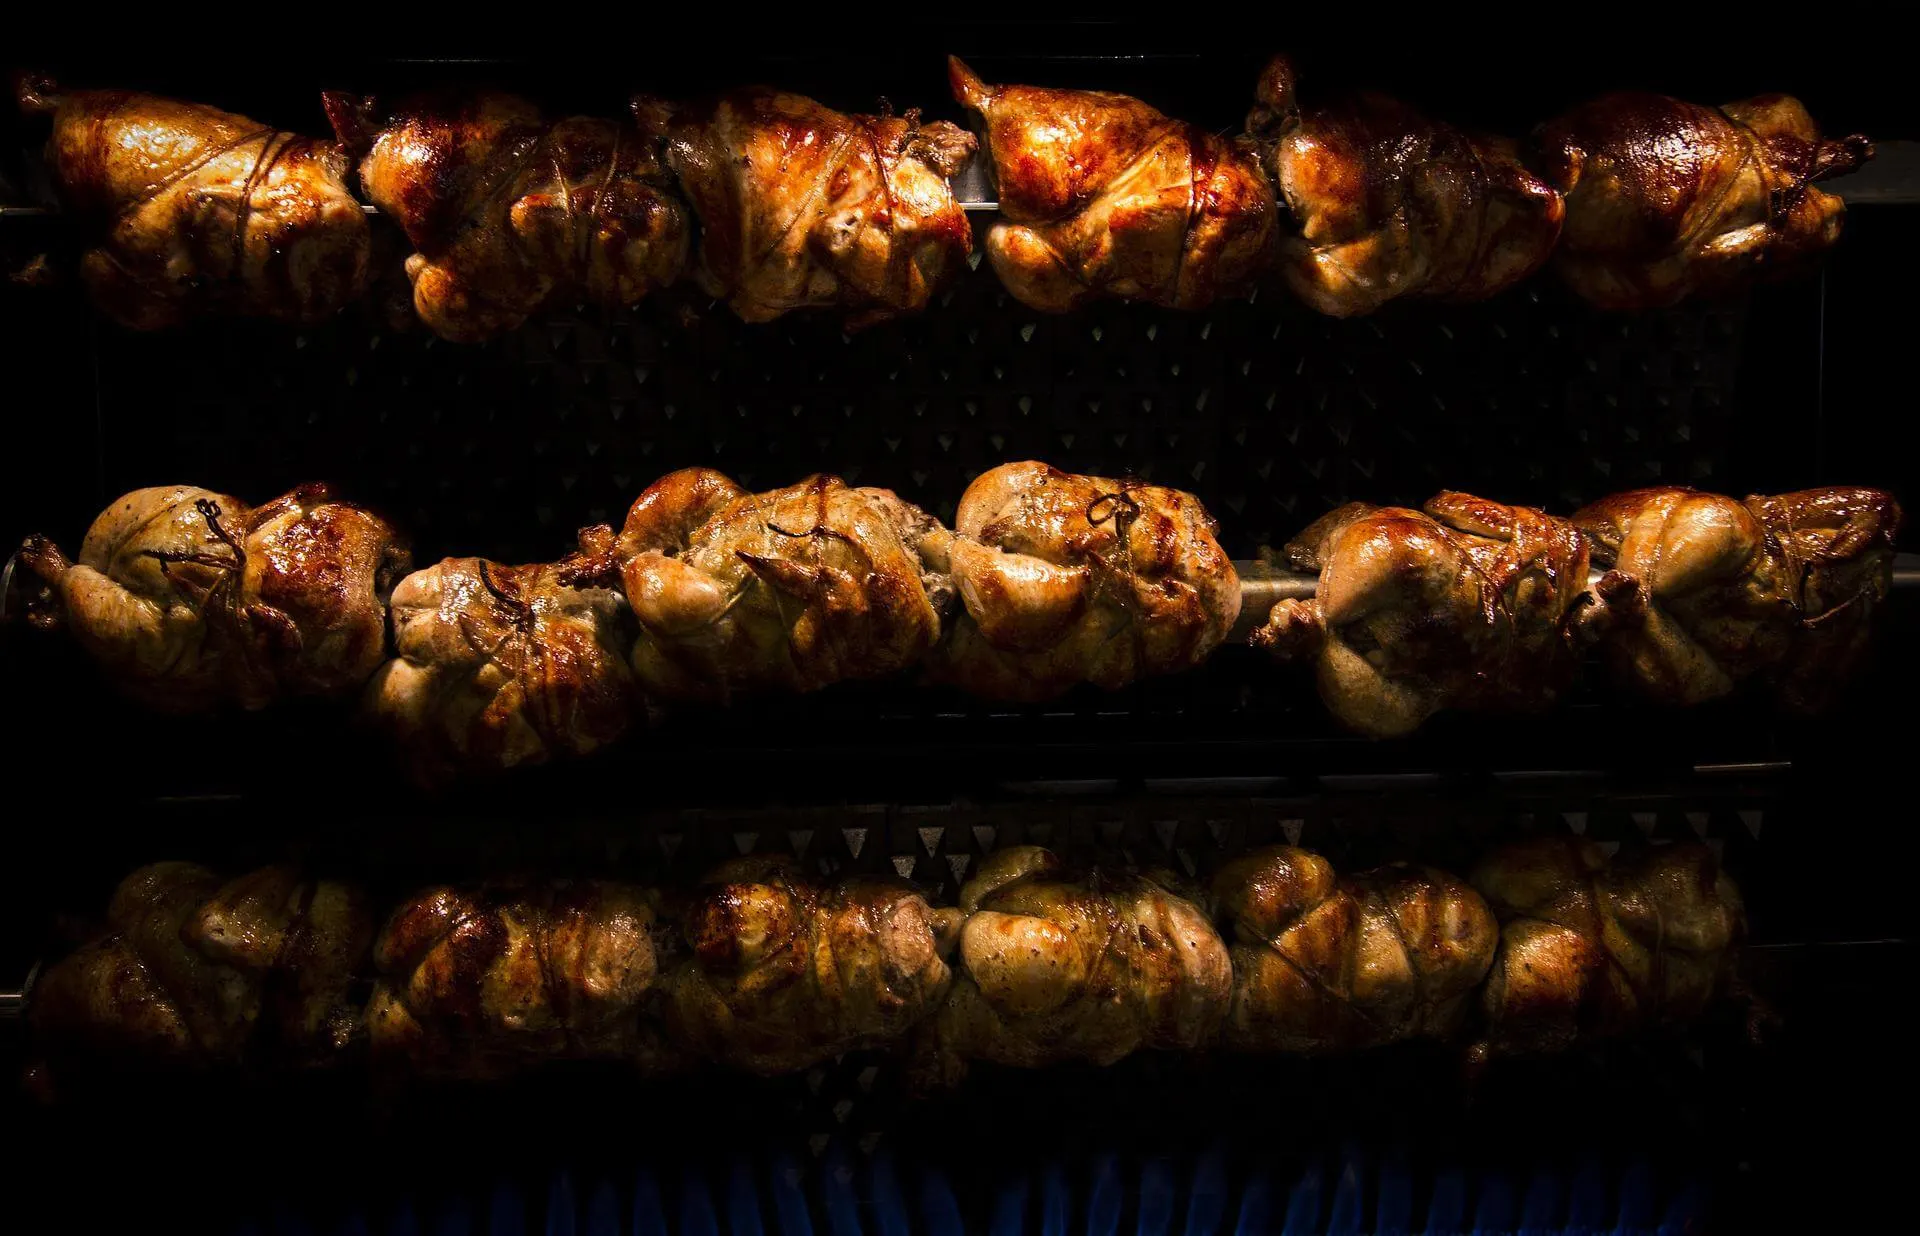 An image of rotisserie spit